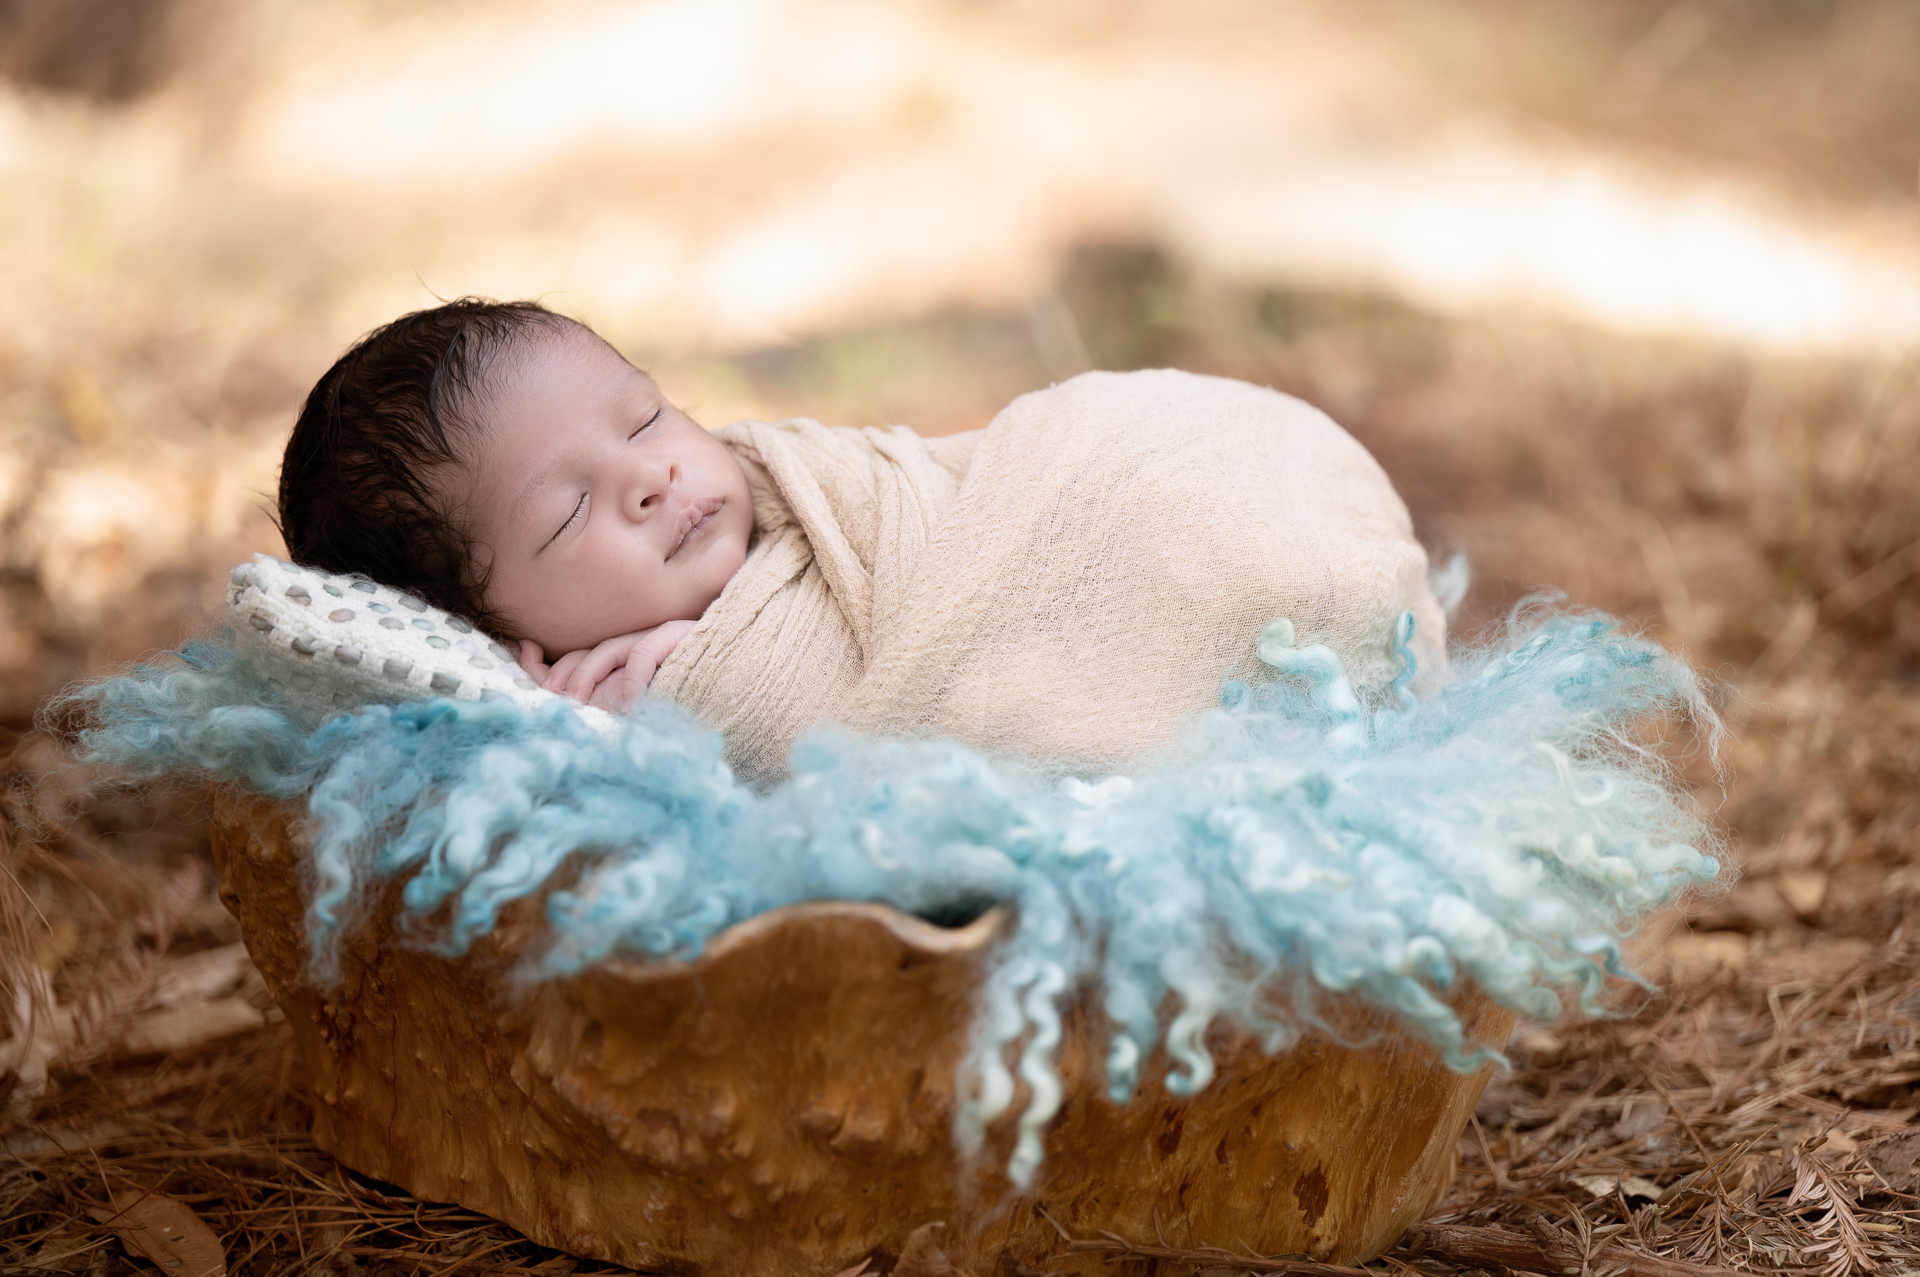 Newborn baby boy wrapped on a light brown outfit, rests on a wood prop outdoors during fall season. Blurry background.